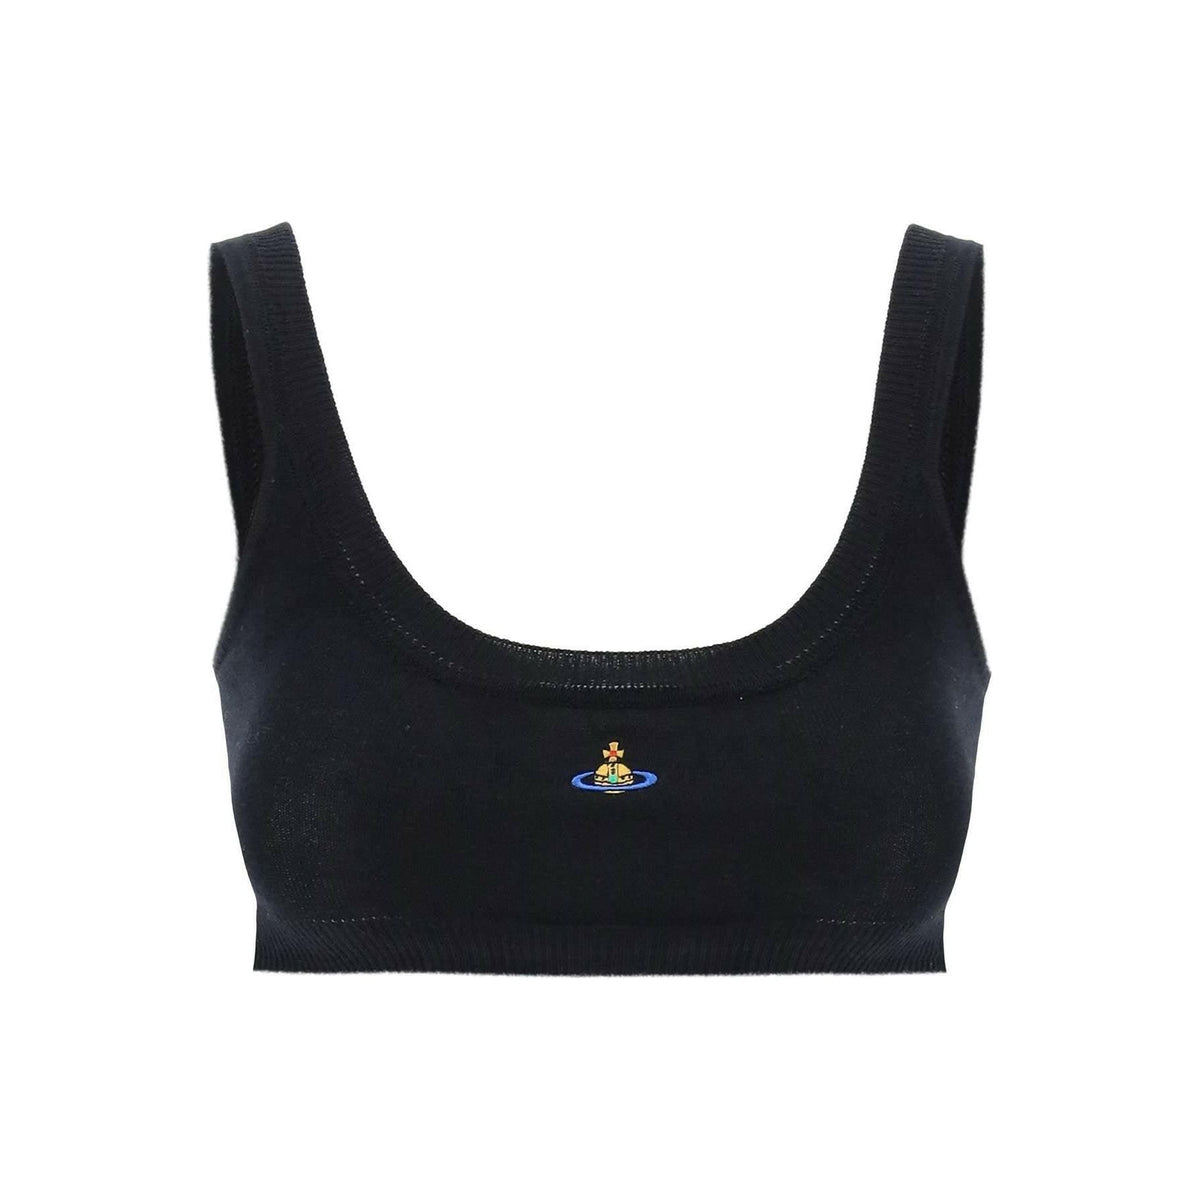 VIVIENNE WESTWOOD - Black Pure Cotton Knit Cropped Bra Top With Orb Embroidery - JOHN JULIA